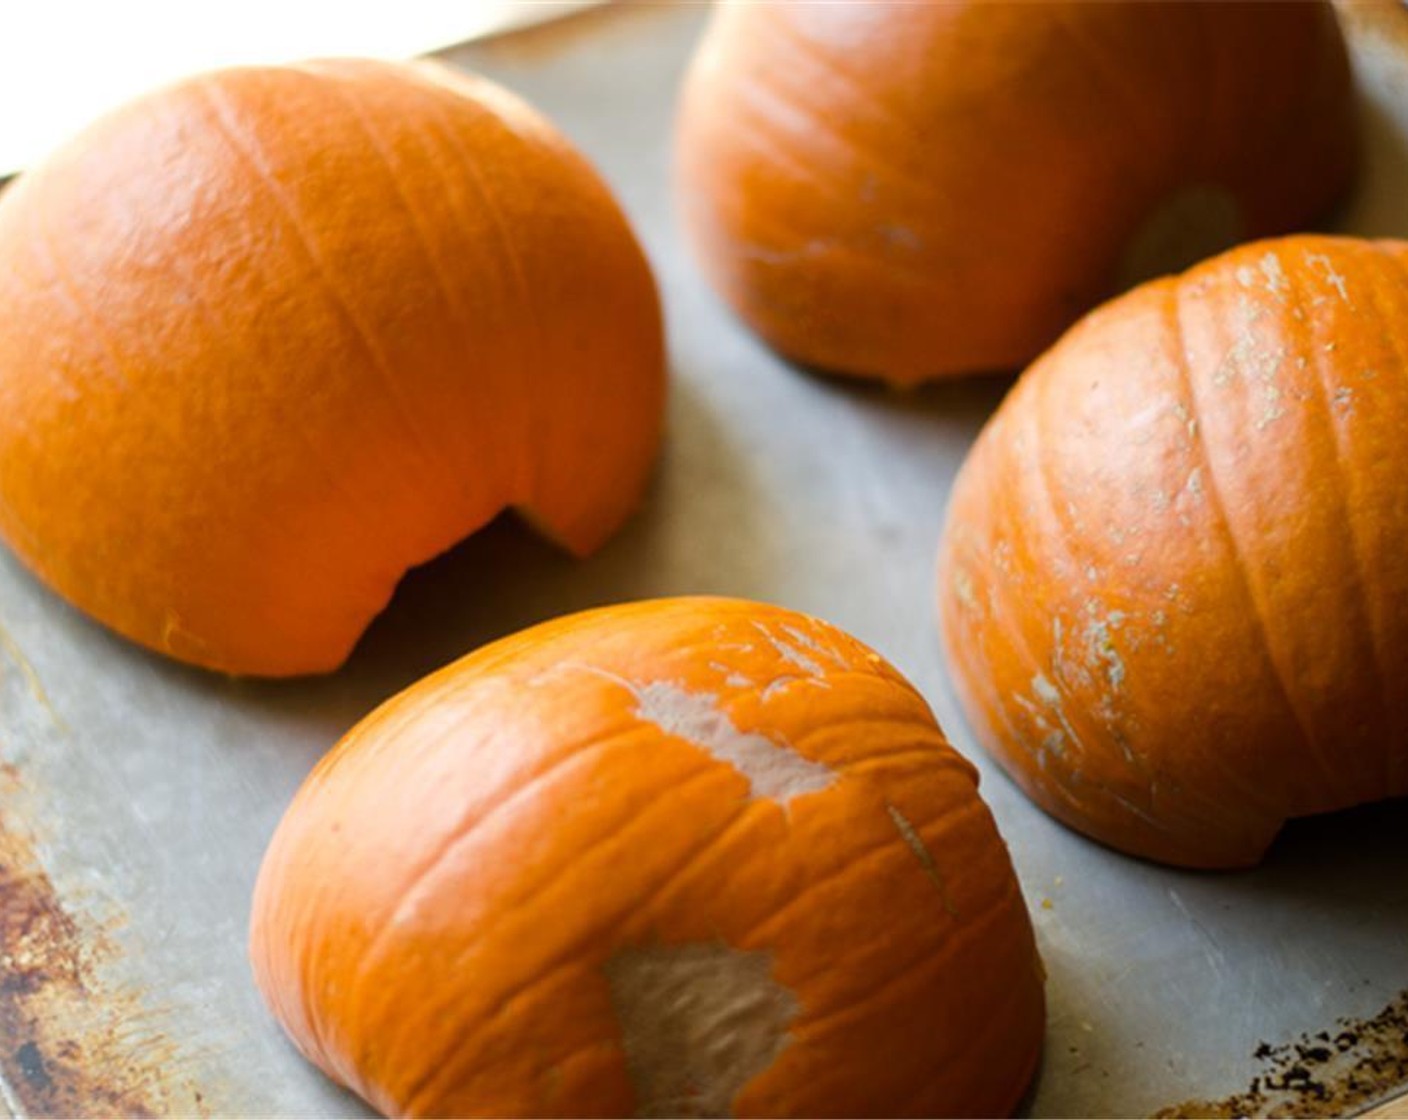 step 2 Chop the tops off the Sugar Pumpkins (2), cut them in half lengthwise, and scoop out the seeds/stringy bits with a spoon. Rub Olive Oil (2 Tbsp) on the inside of each, then place face down on a baking sheet and roast for about 1 hour at 350 degrees F or until fork tender.